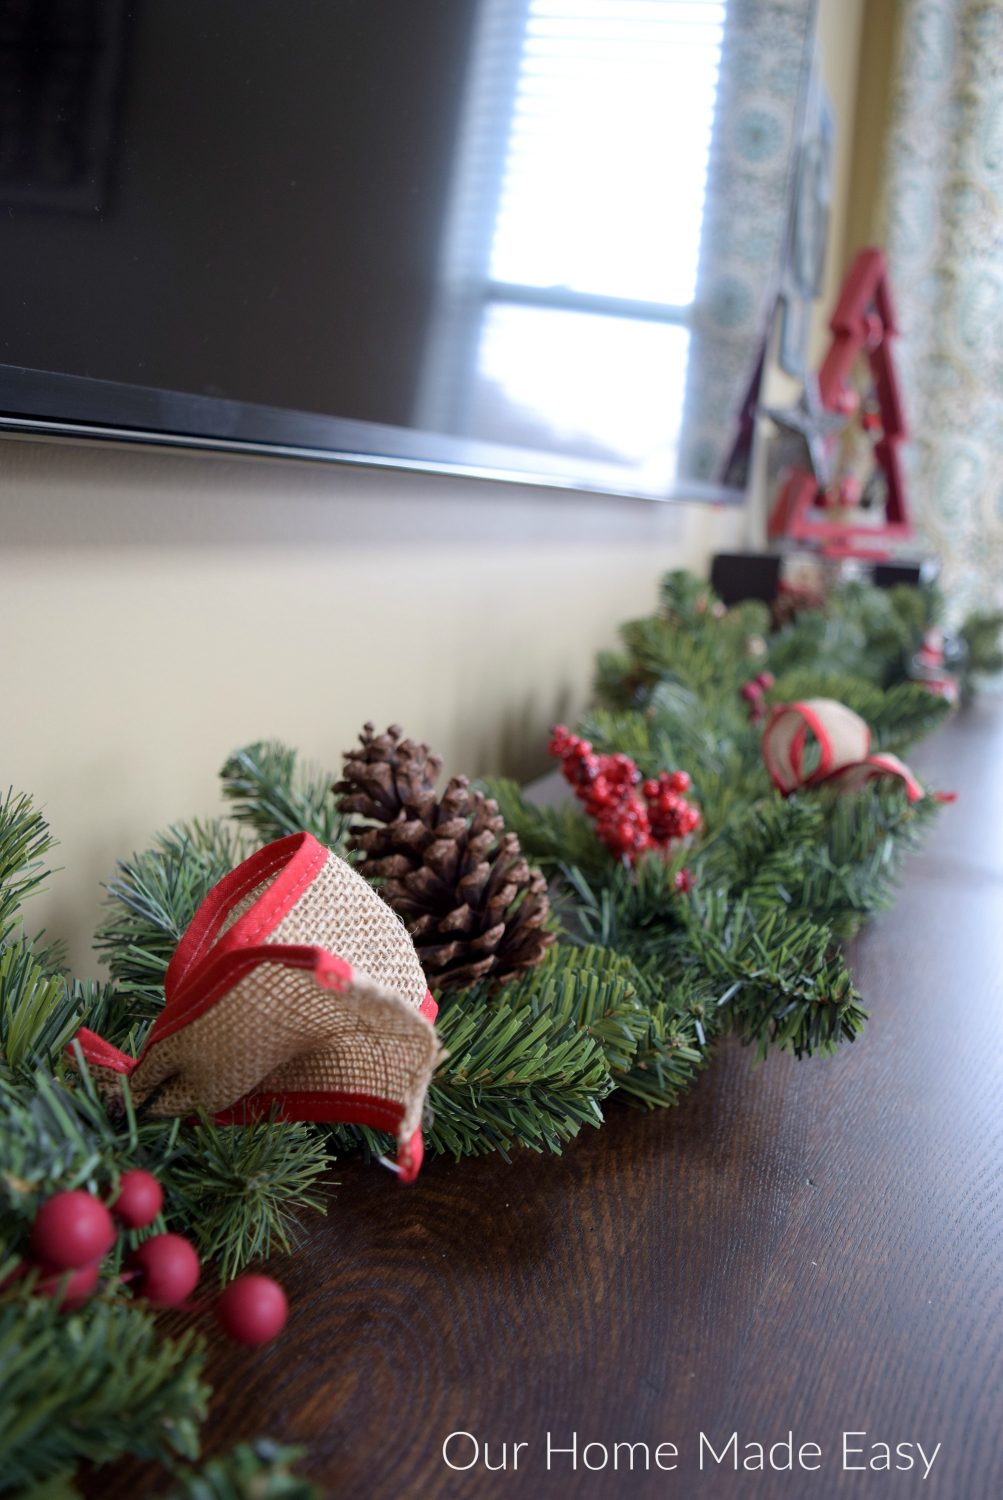 This faux pine garland with burlap ribbon and pinecones is a simple way to add a festive Christmas touch to your home.